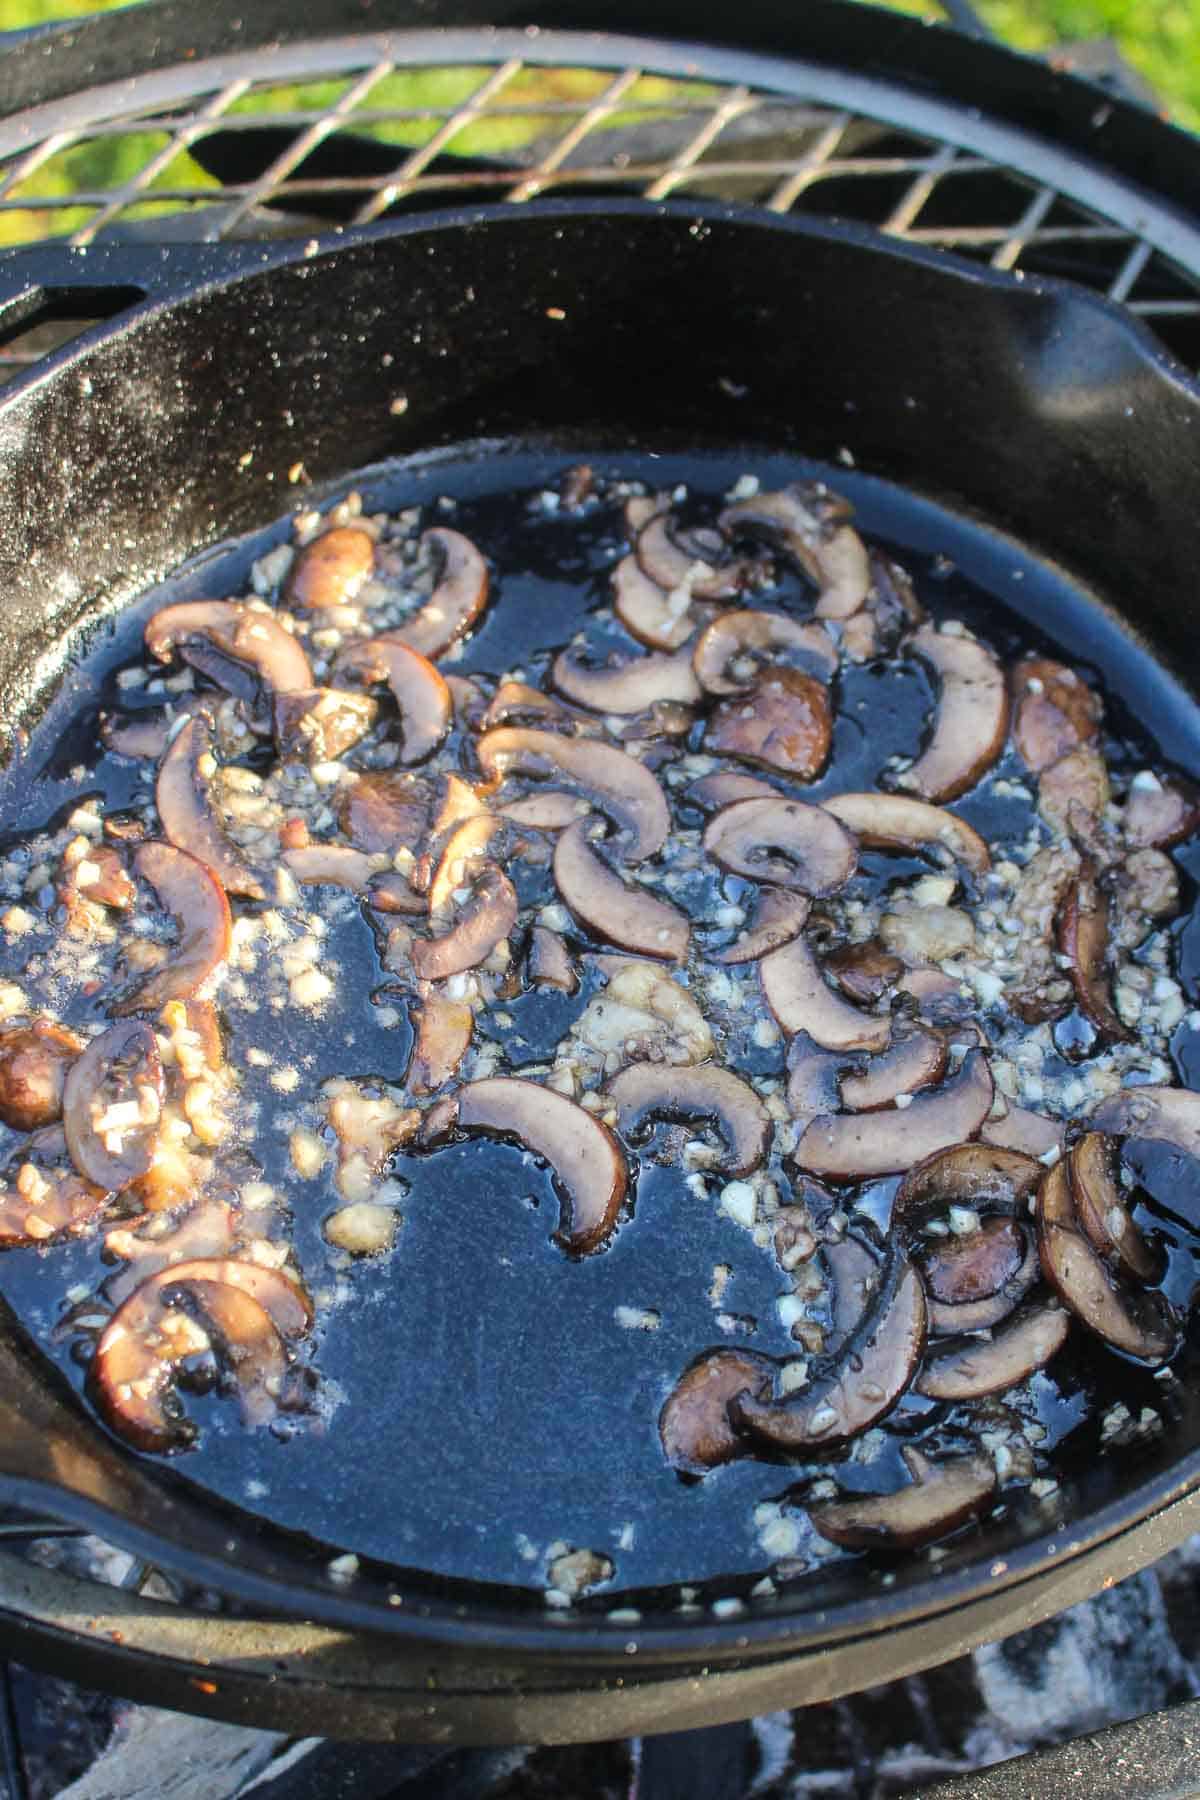 The mushrooms on the grill getting mixed together so we can begin to form the cream sauce.